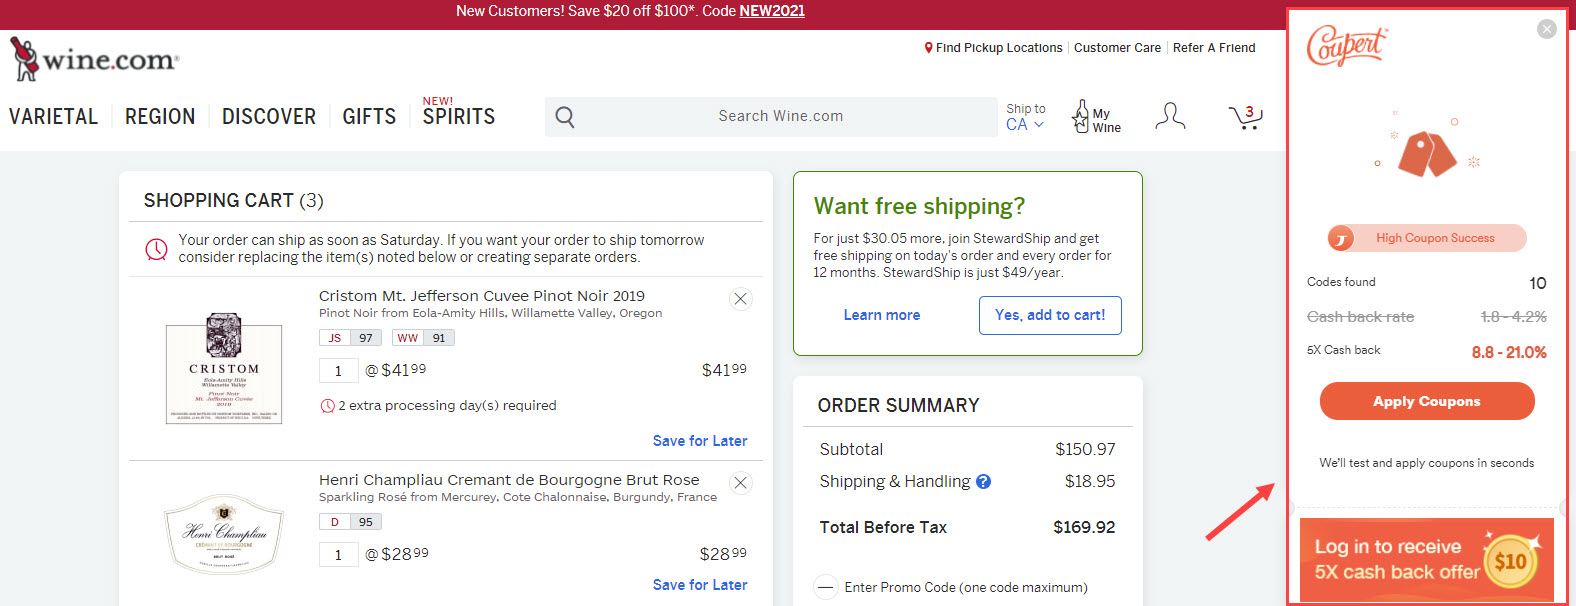 Wine.com checkout coupert finds coupons